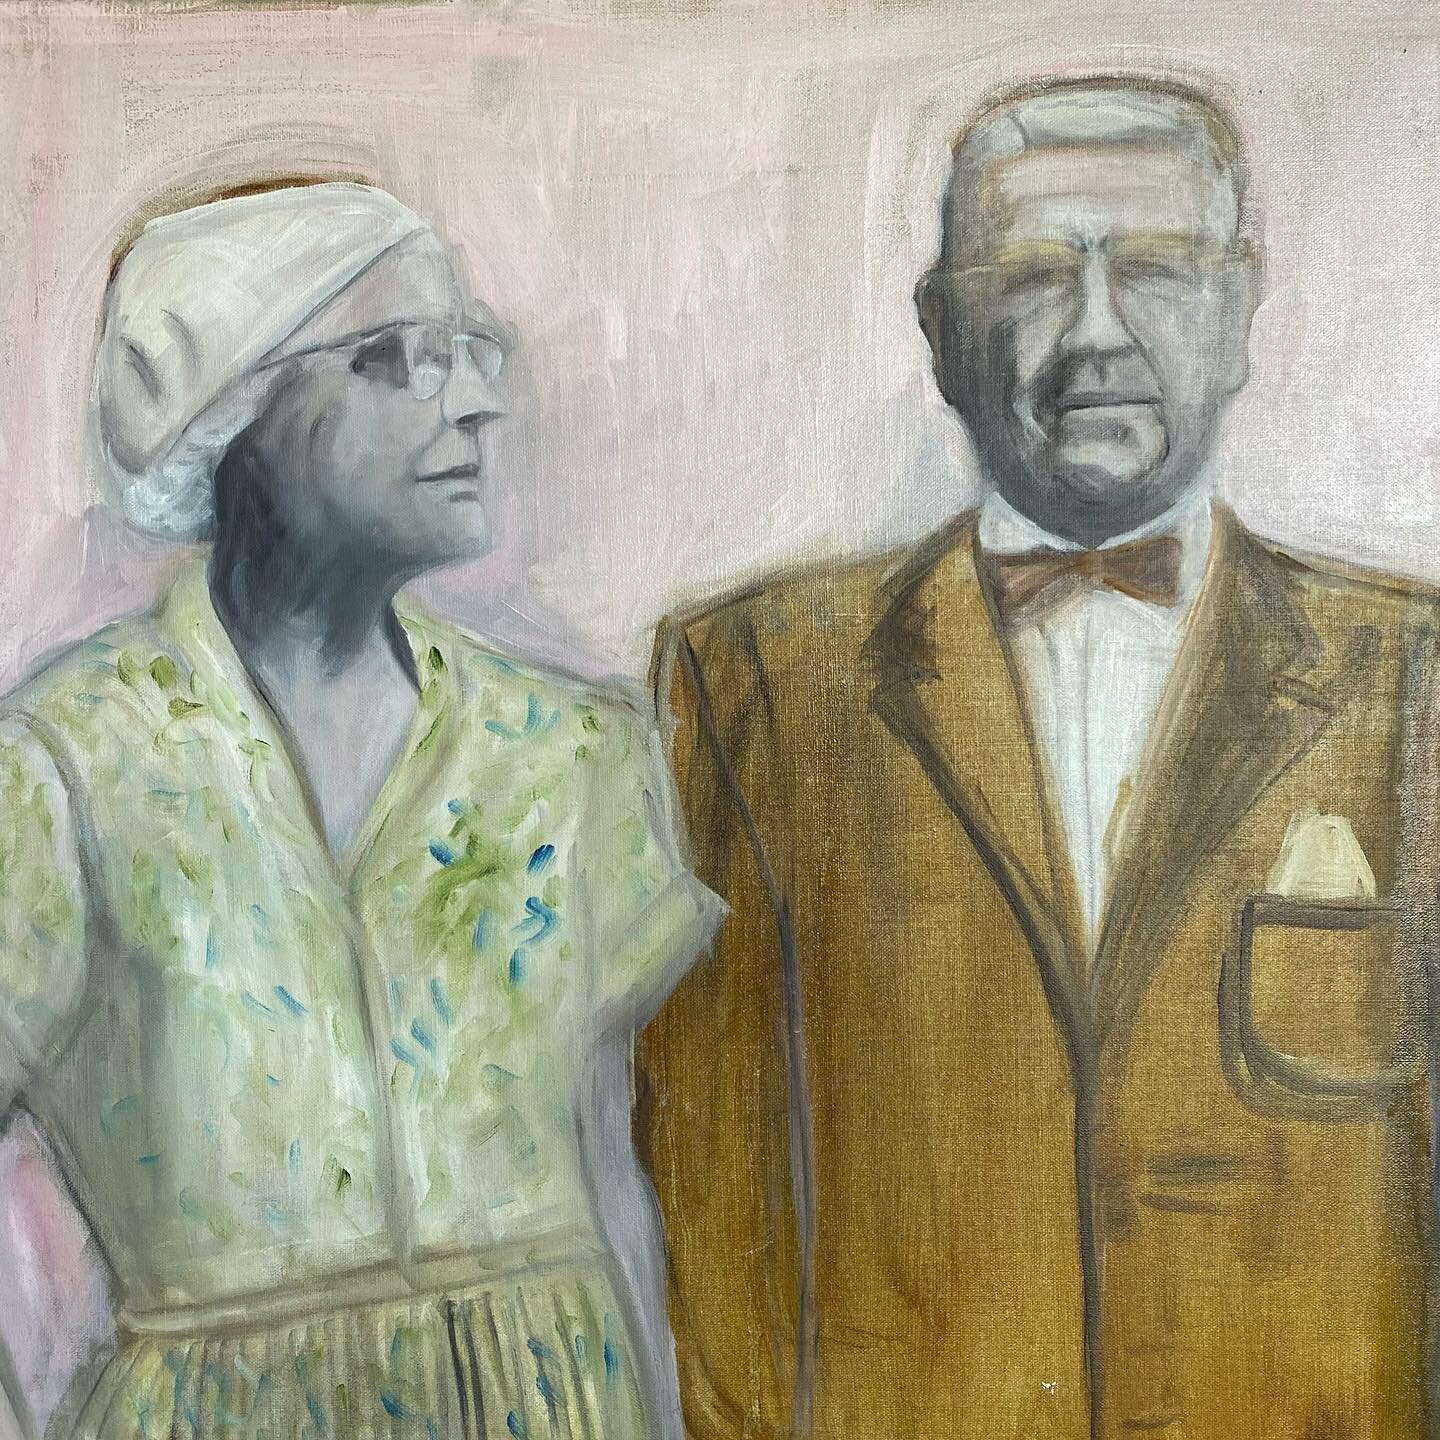 Meet &lsquo;The Cantlons&rsquo;, my grandparents on my mother&rsquo;s side, a painting still in progress. This is from a photo sent to me by my cousin Jenn Cantlon. I never really knew them, although I was named after her. They lived quite far from u